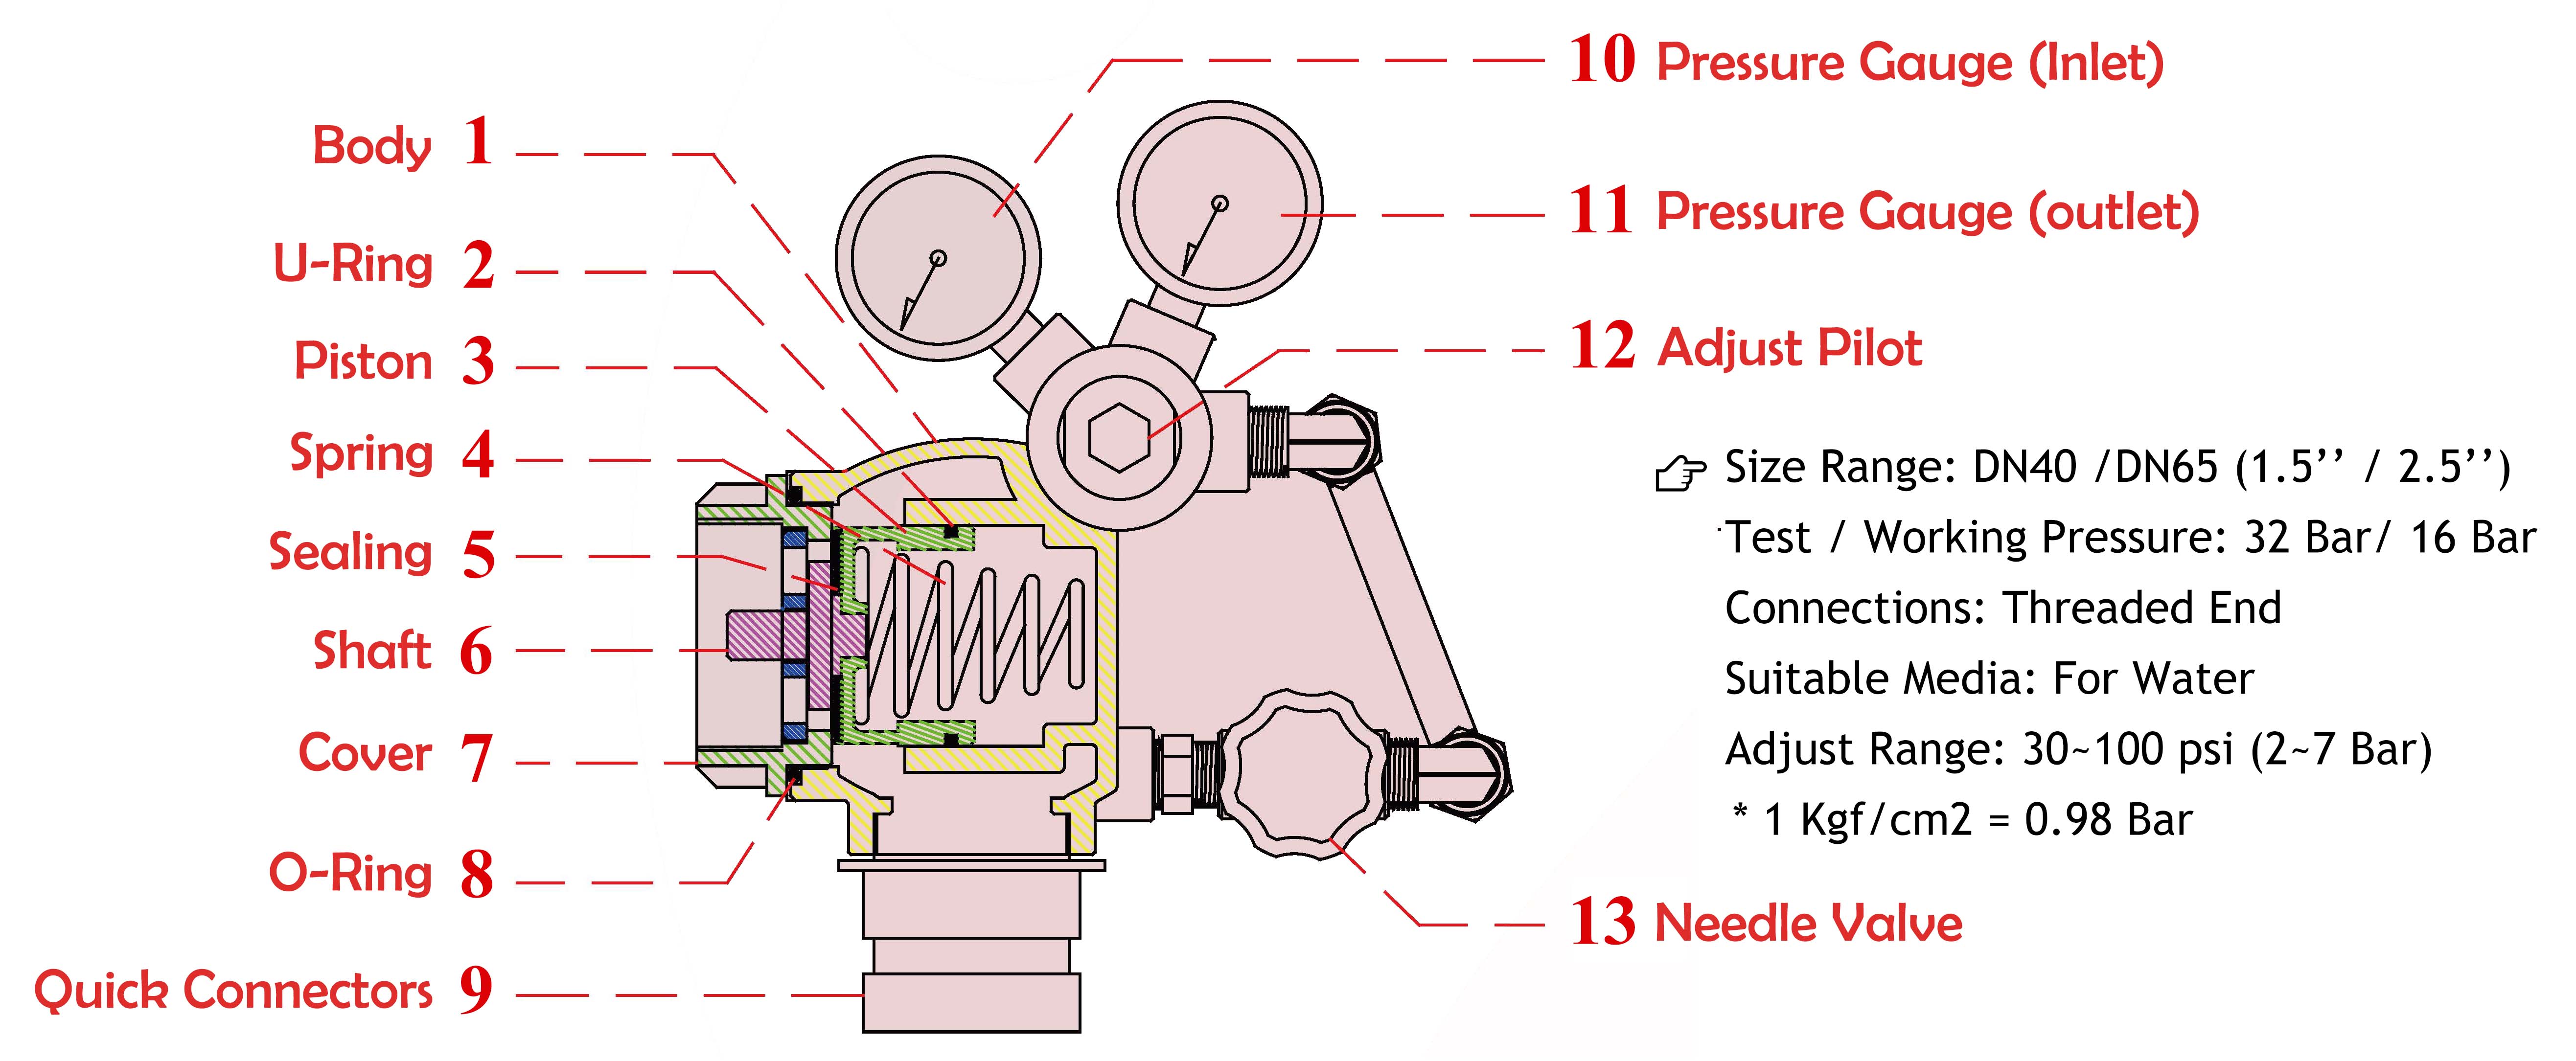 The structure and components of Z-Tide Fire Hydrant Pressure Reducing Valve